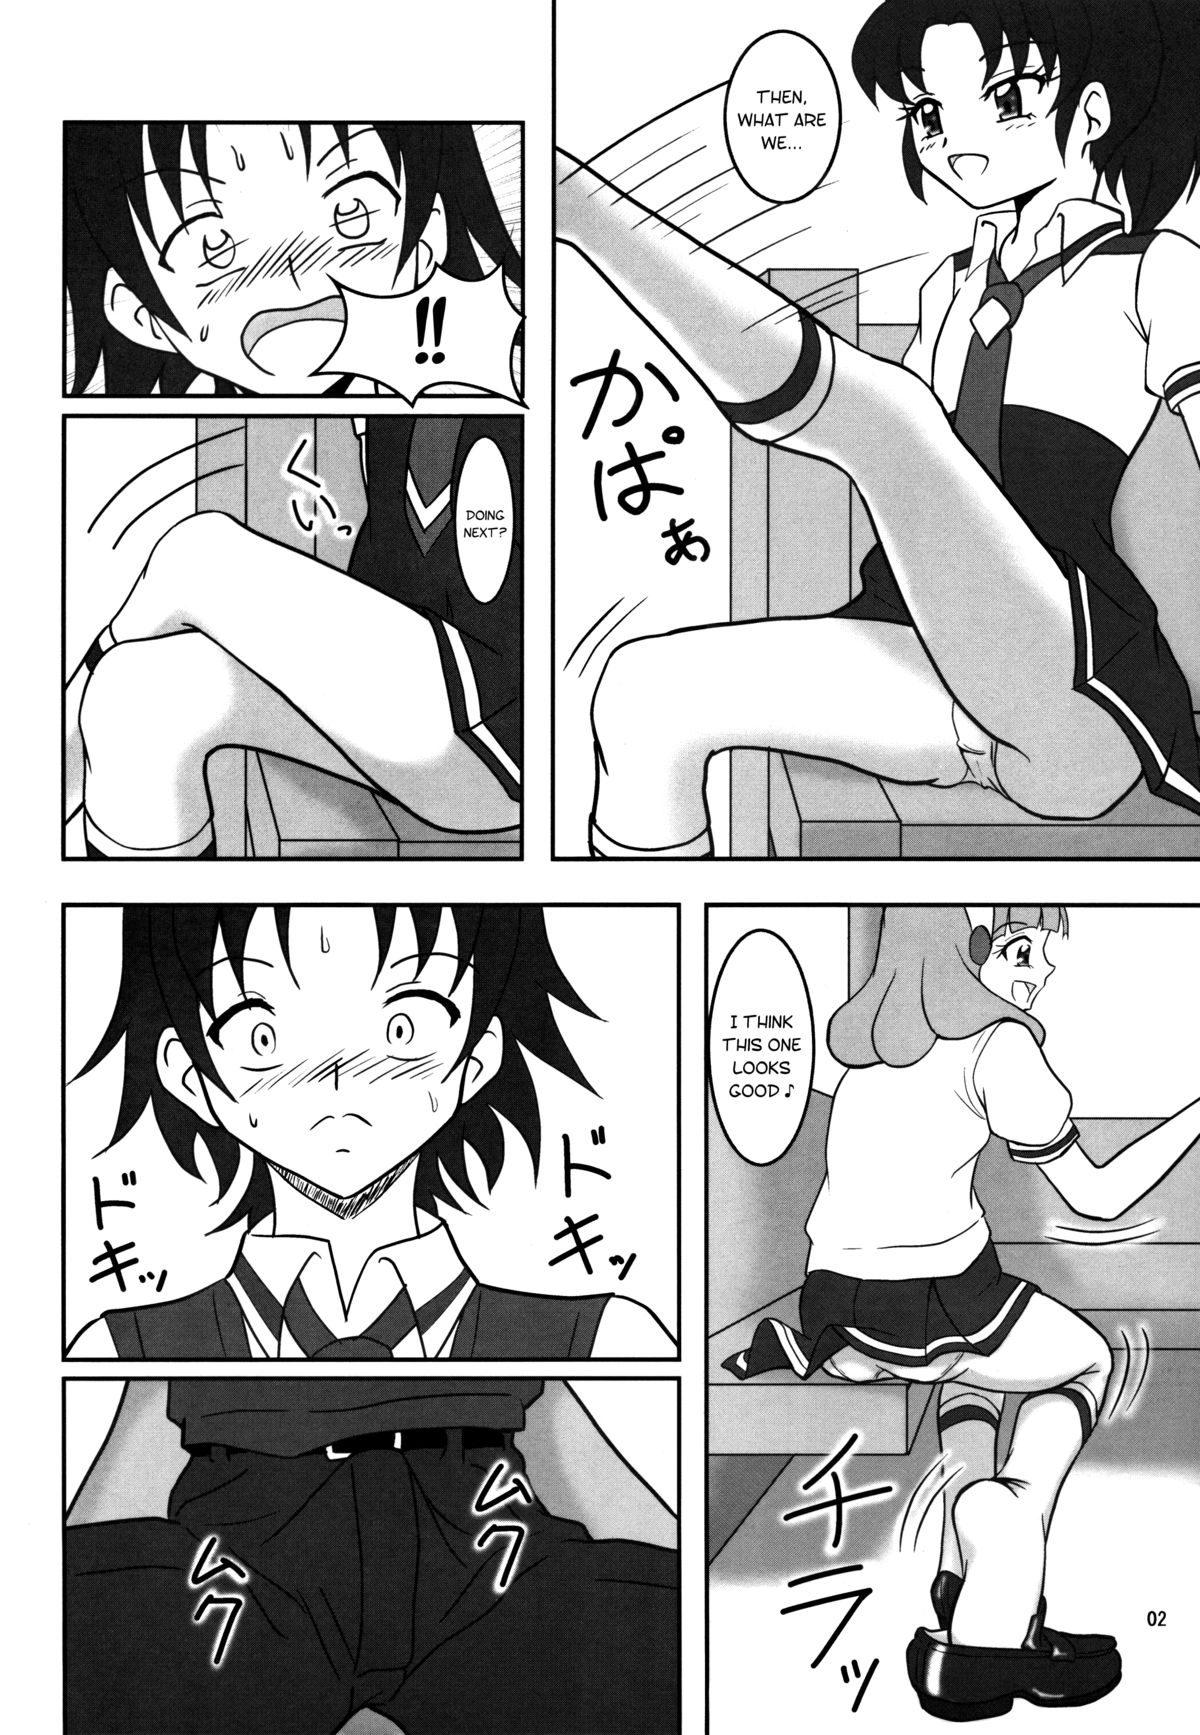 (C82) [AFJ (Ashi_O)] Smell Zuricure | Smell Footycure (Smile Precure!) [English] page 3 full